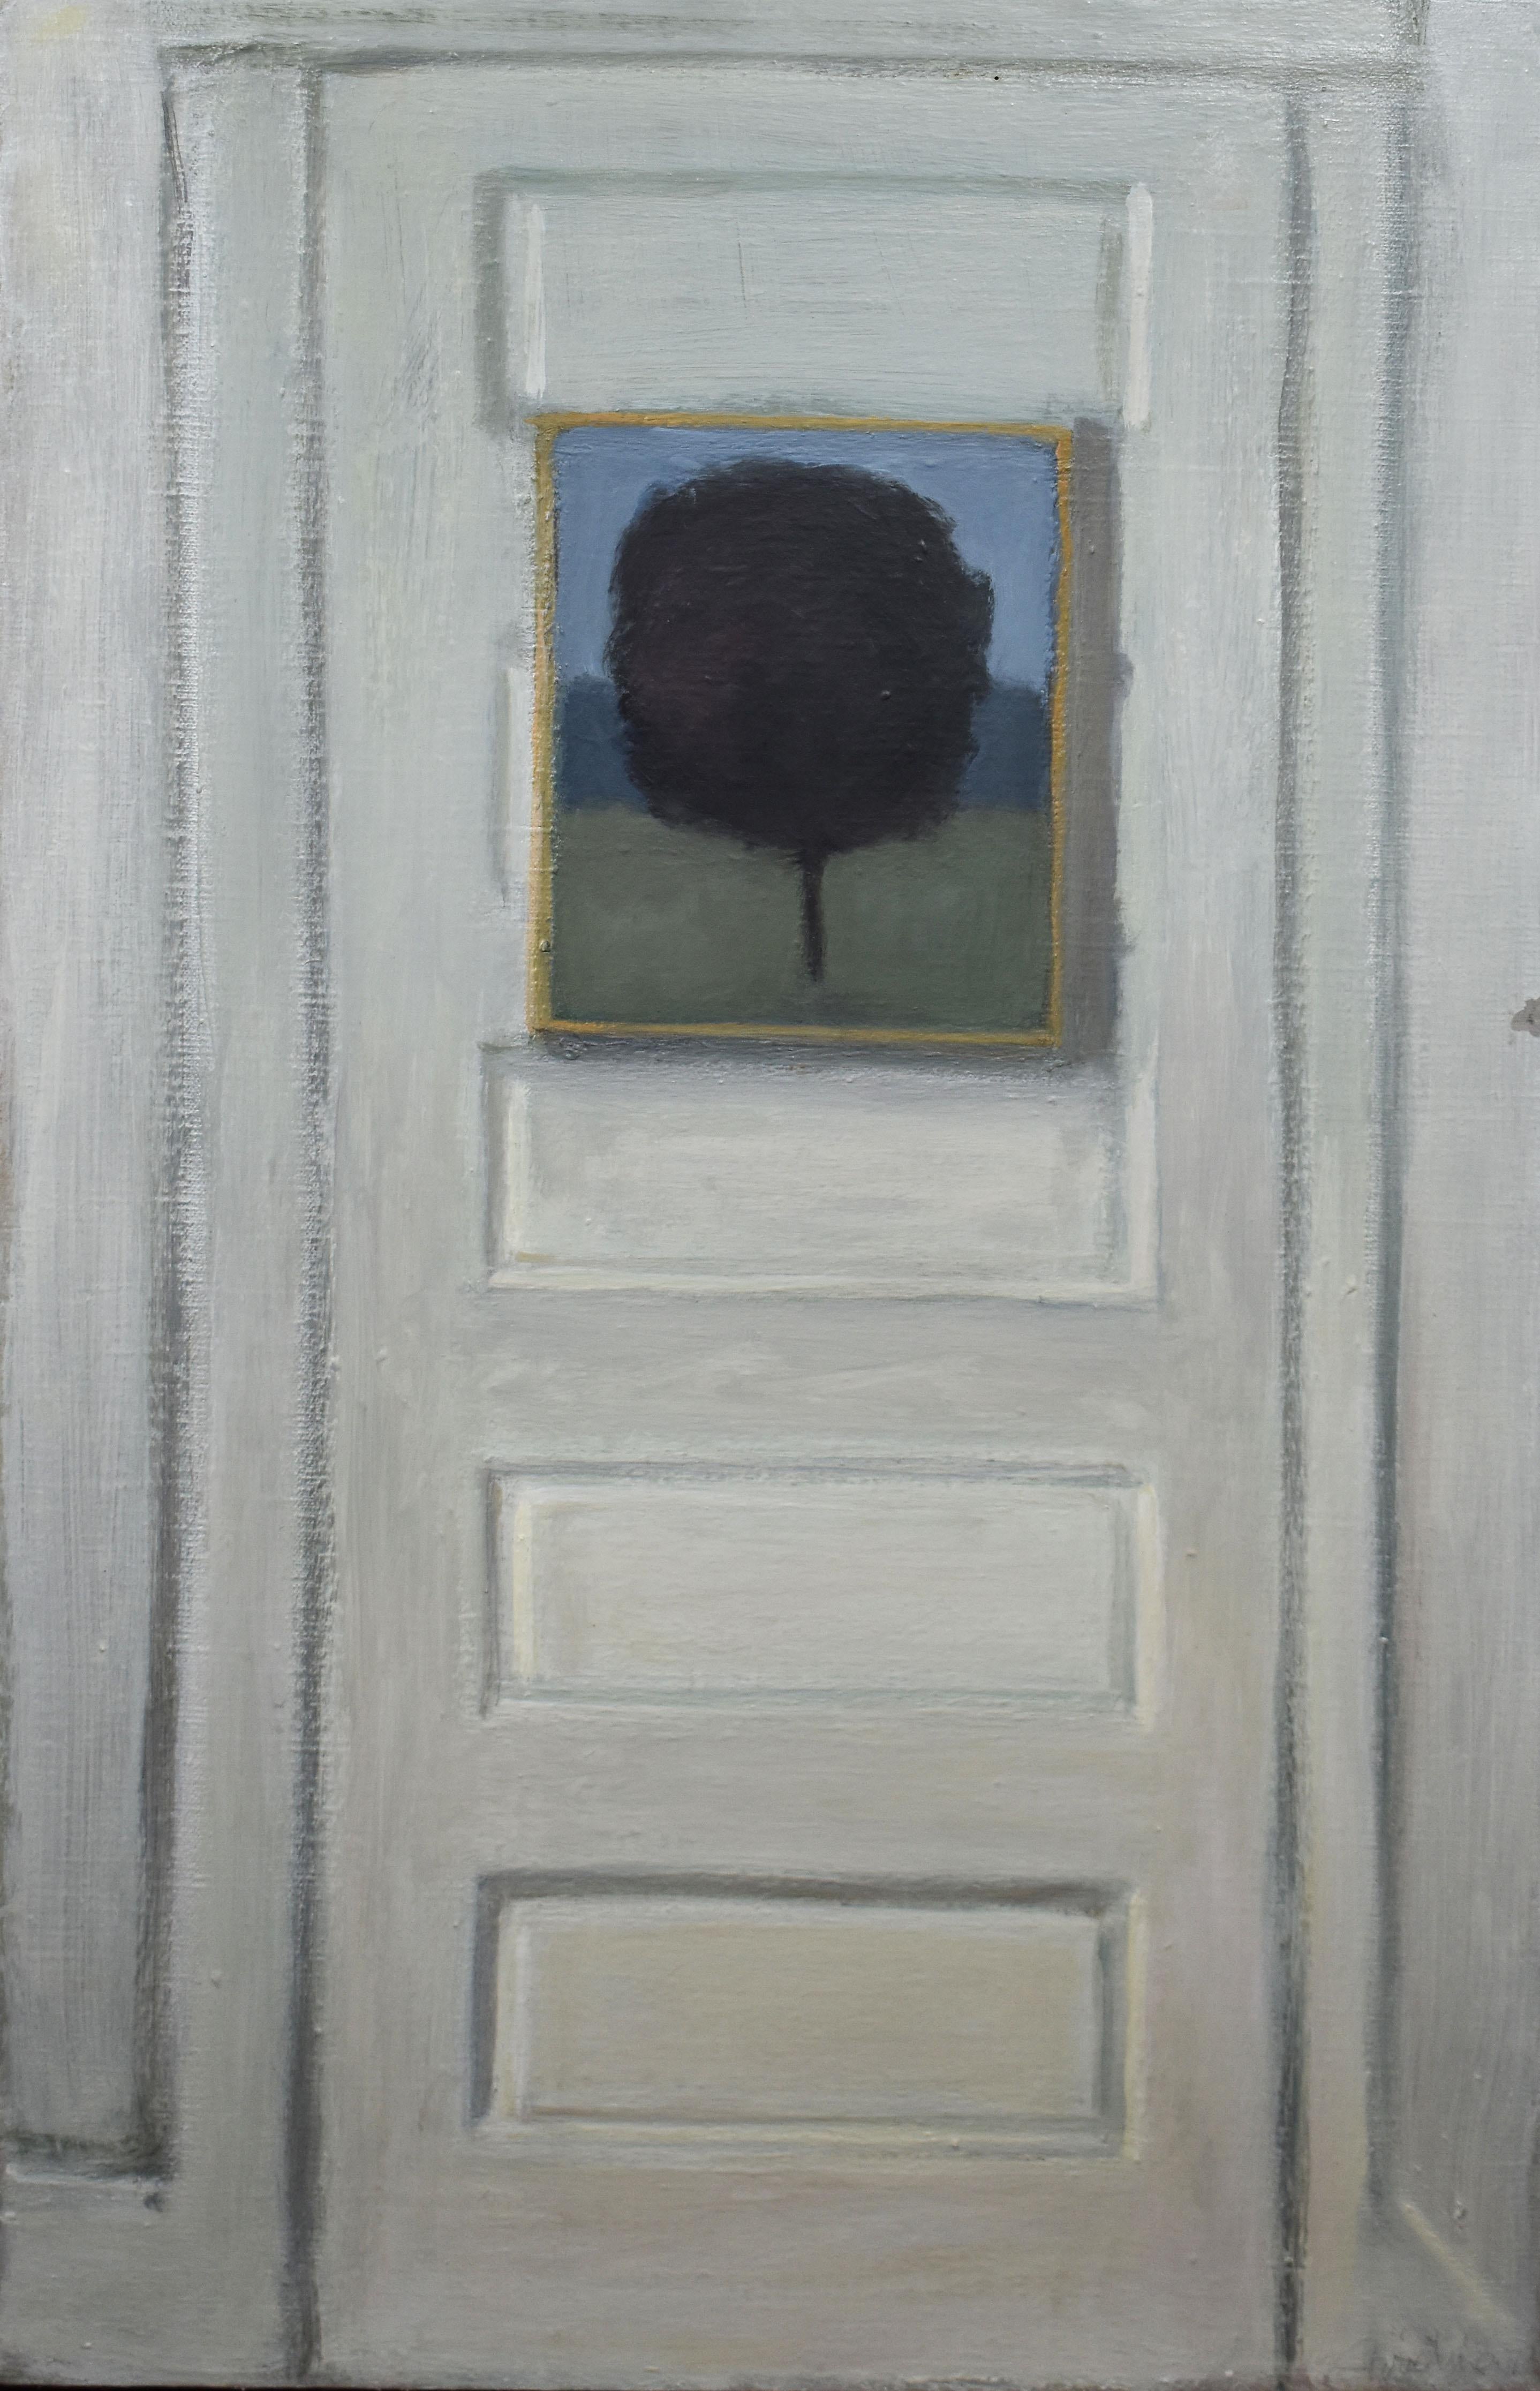 Antique American modernist tromp l'eoil interior painting. Oil on canvas, circa 1973. Signed. Displayed in a period modernist frame. Image size, 18